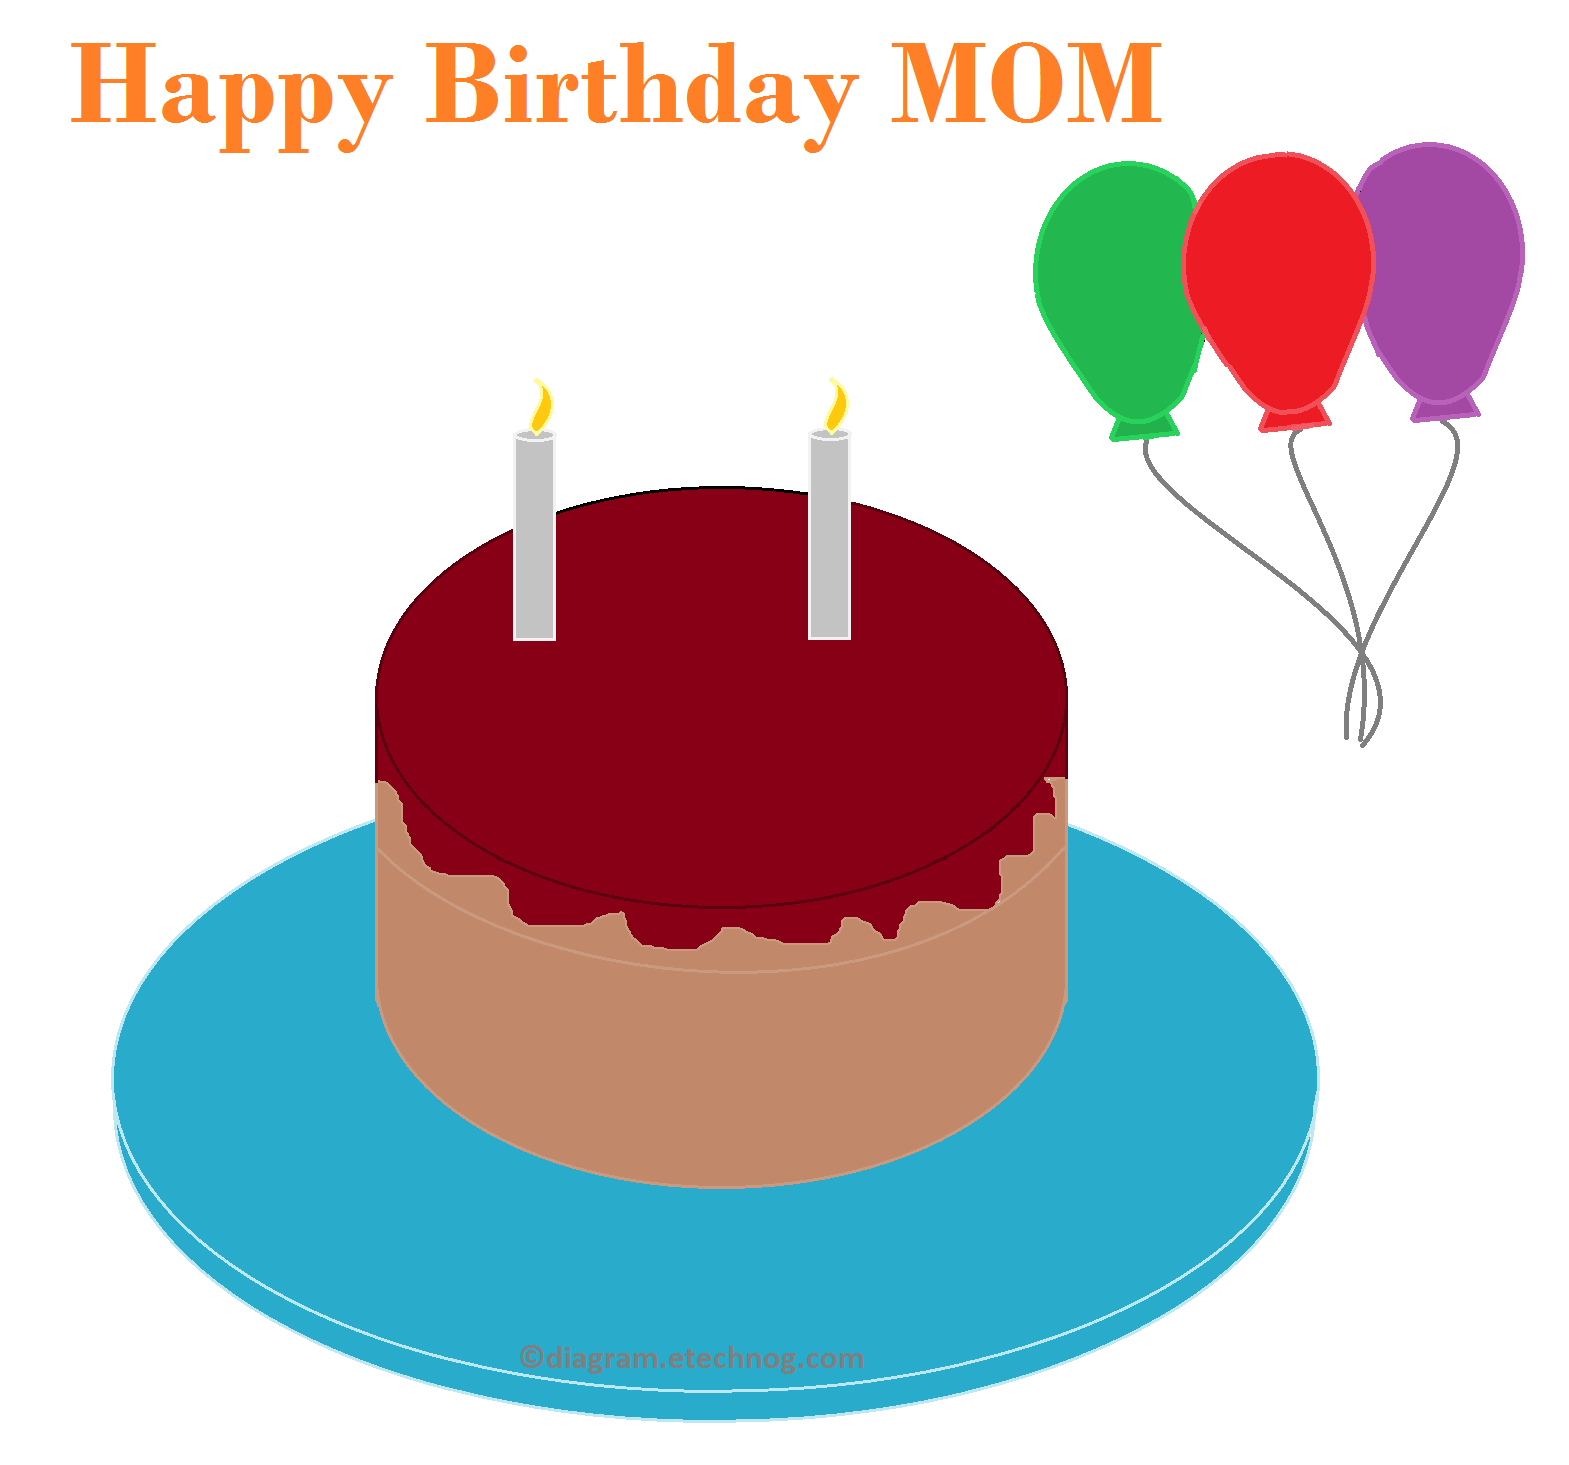 happy birthday image for mom mother